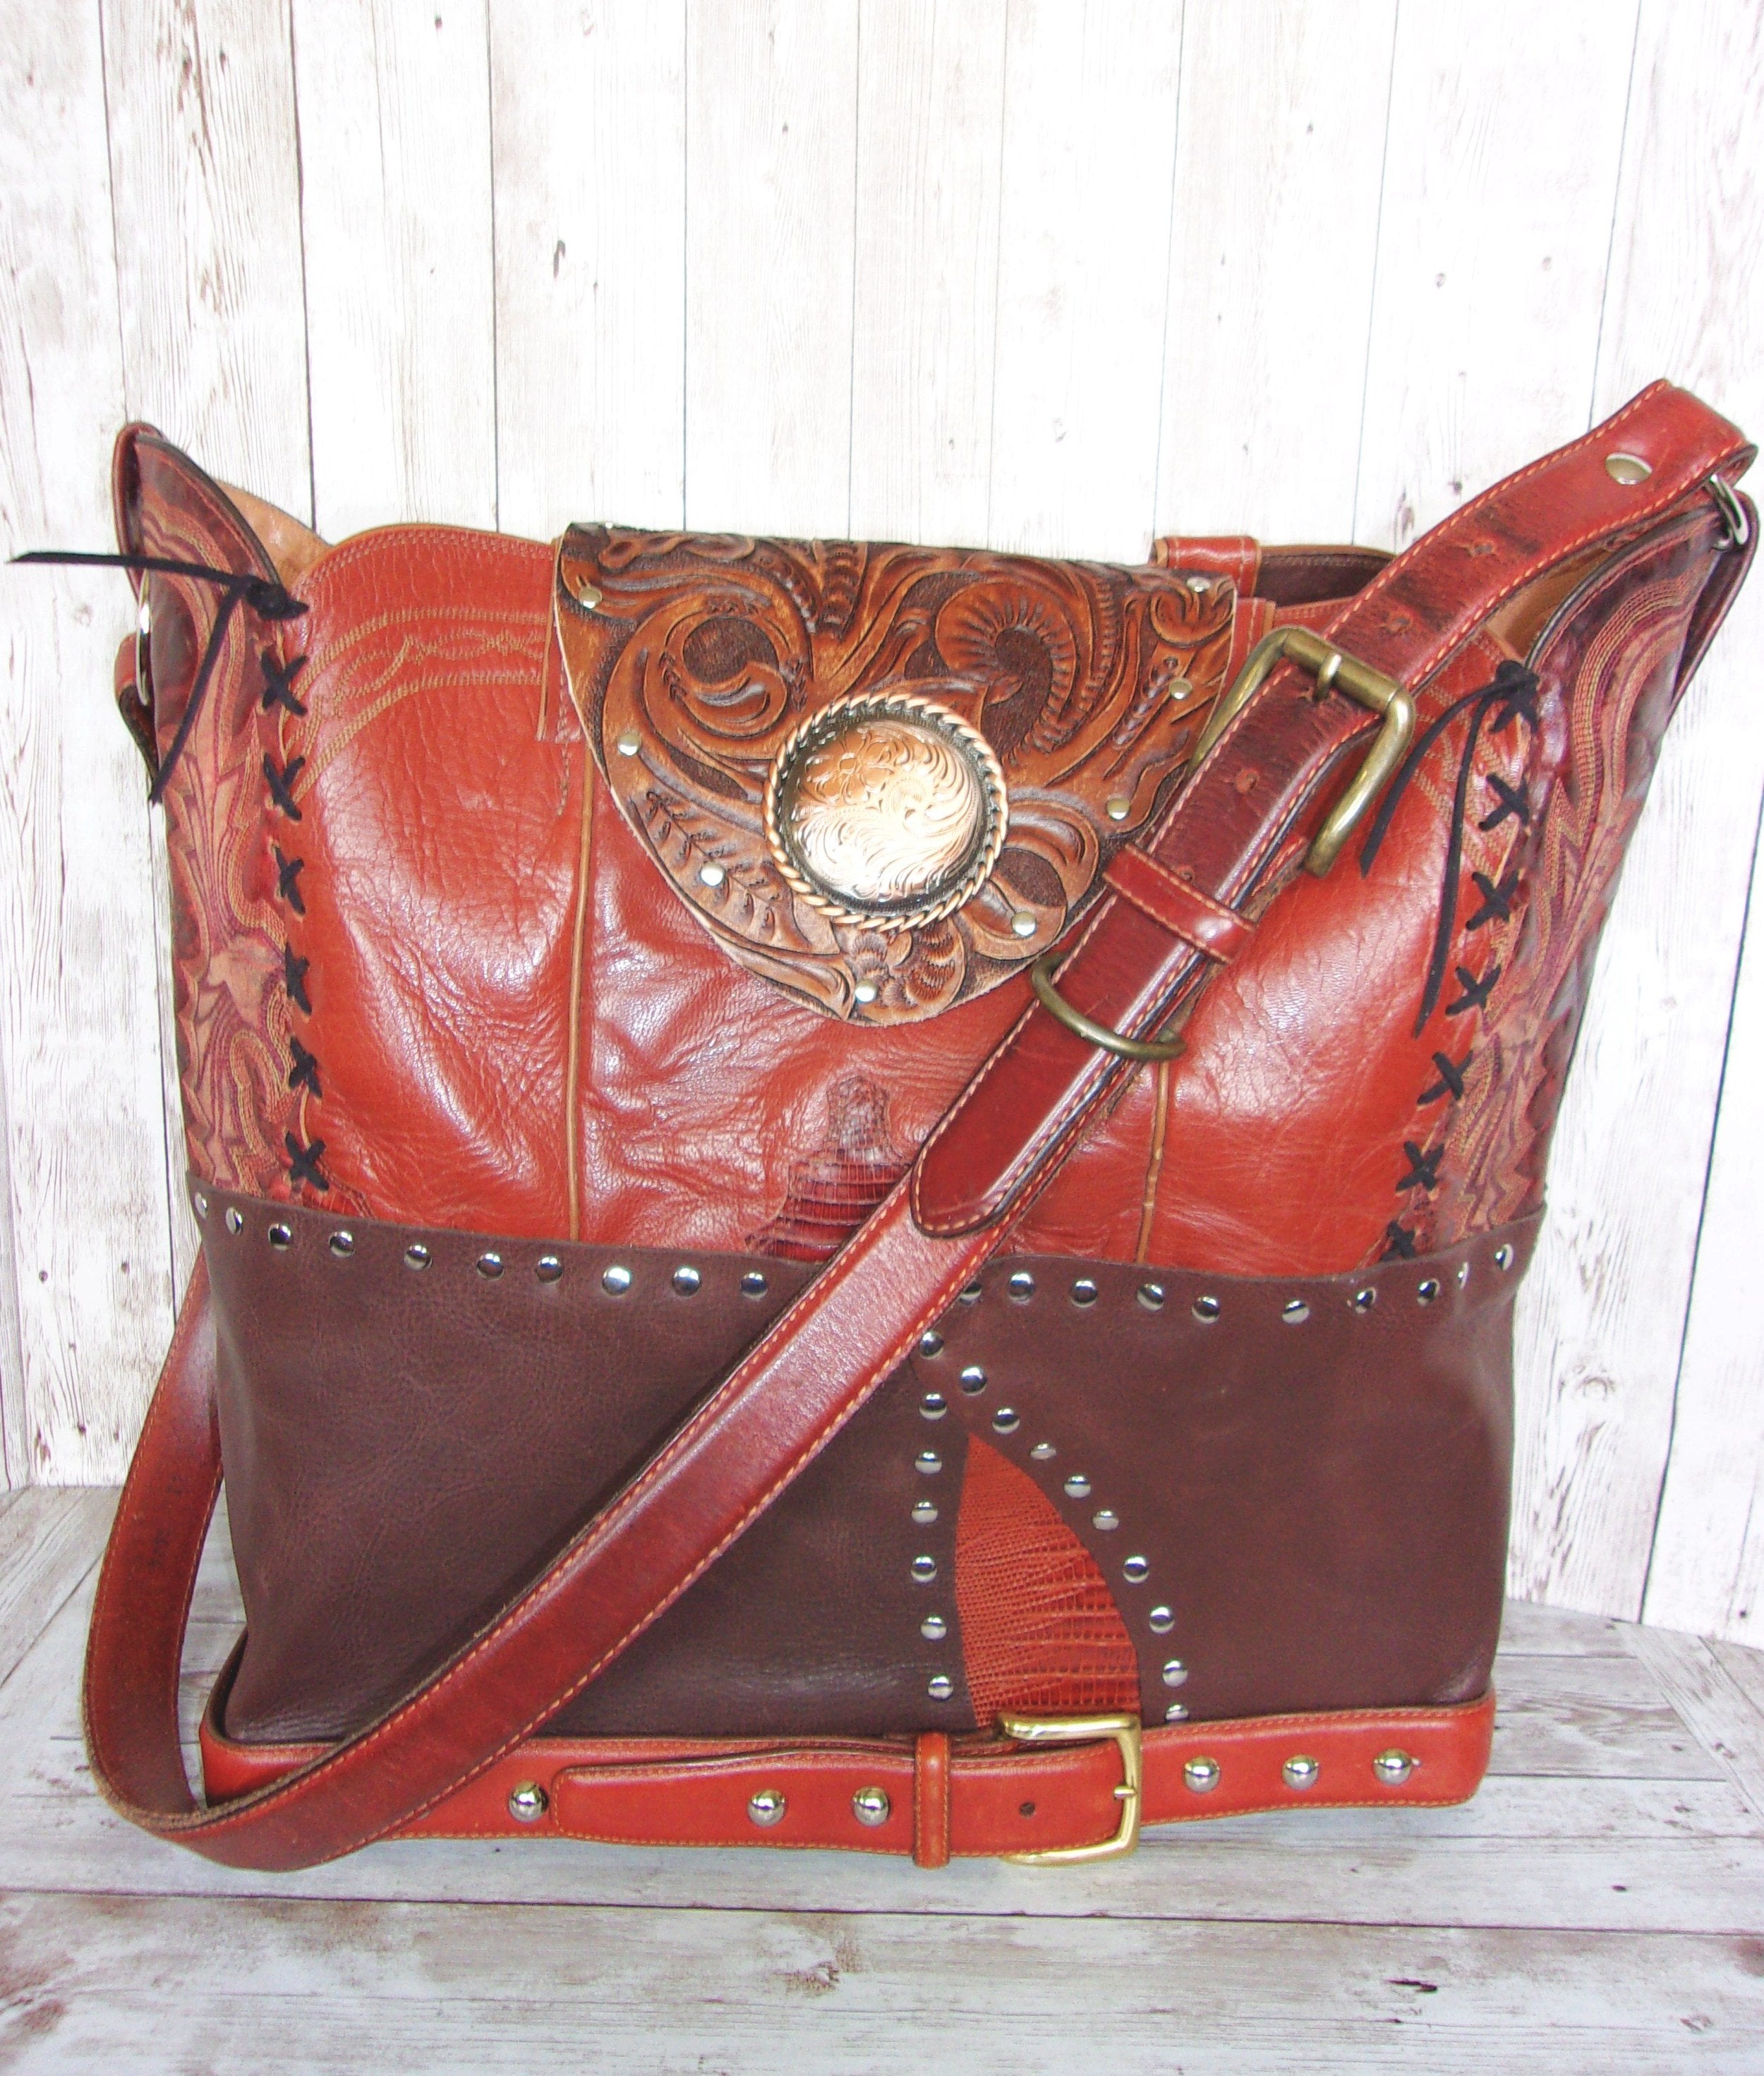 Western Laptop Tote - Extra Large Cowboy Boot Purse - Western Travel Bag LT45 cowboy boot purses, western fringe purse, handmade leather purses, boot purse, handmade western purse, custom leather handbags Chris Thompson Bags